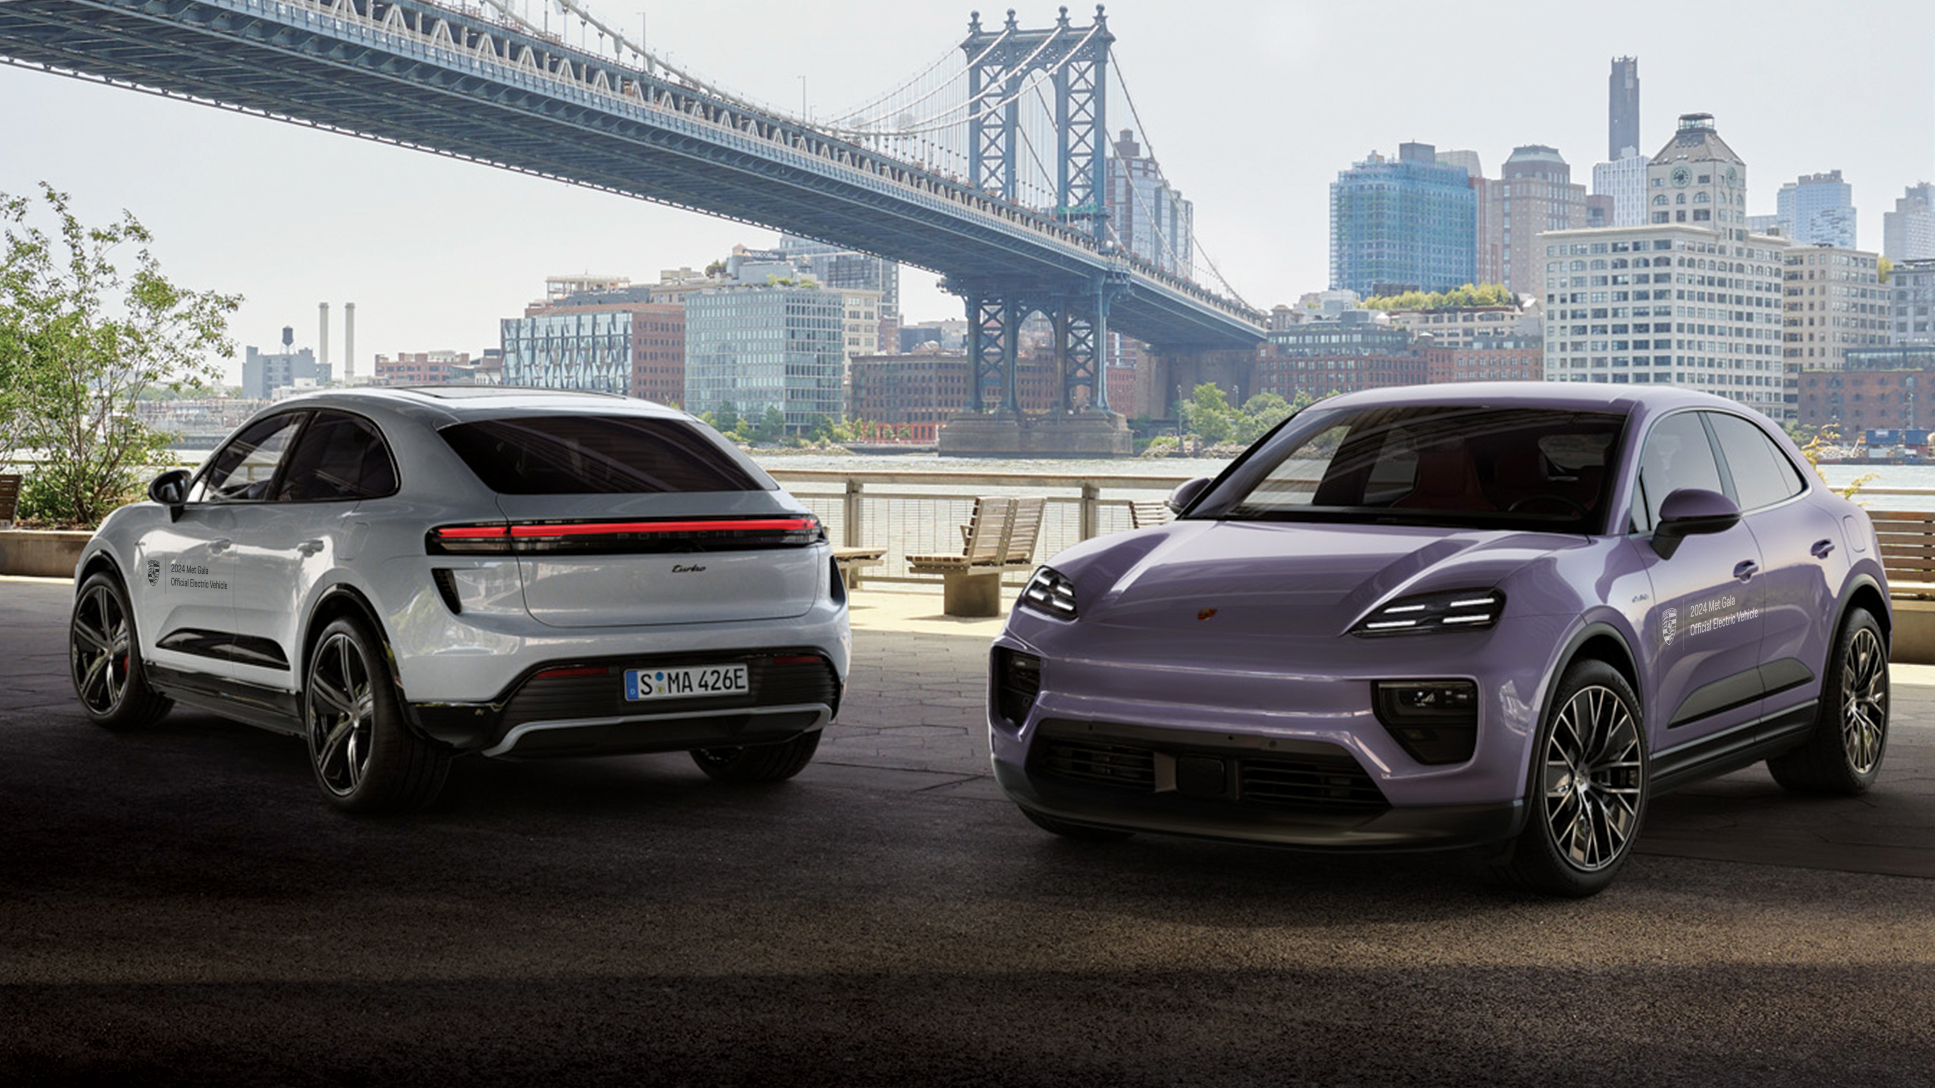 All-star lineup set to celebrate fashion’s biggest night with Porsche